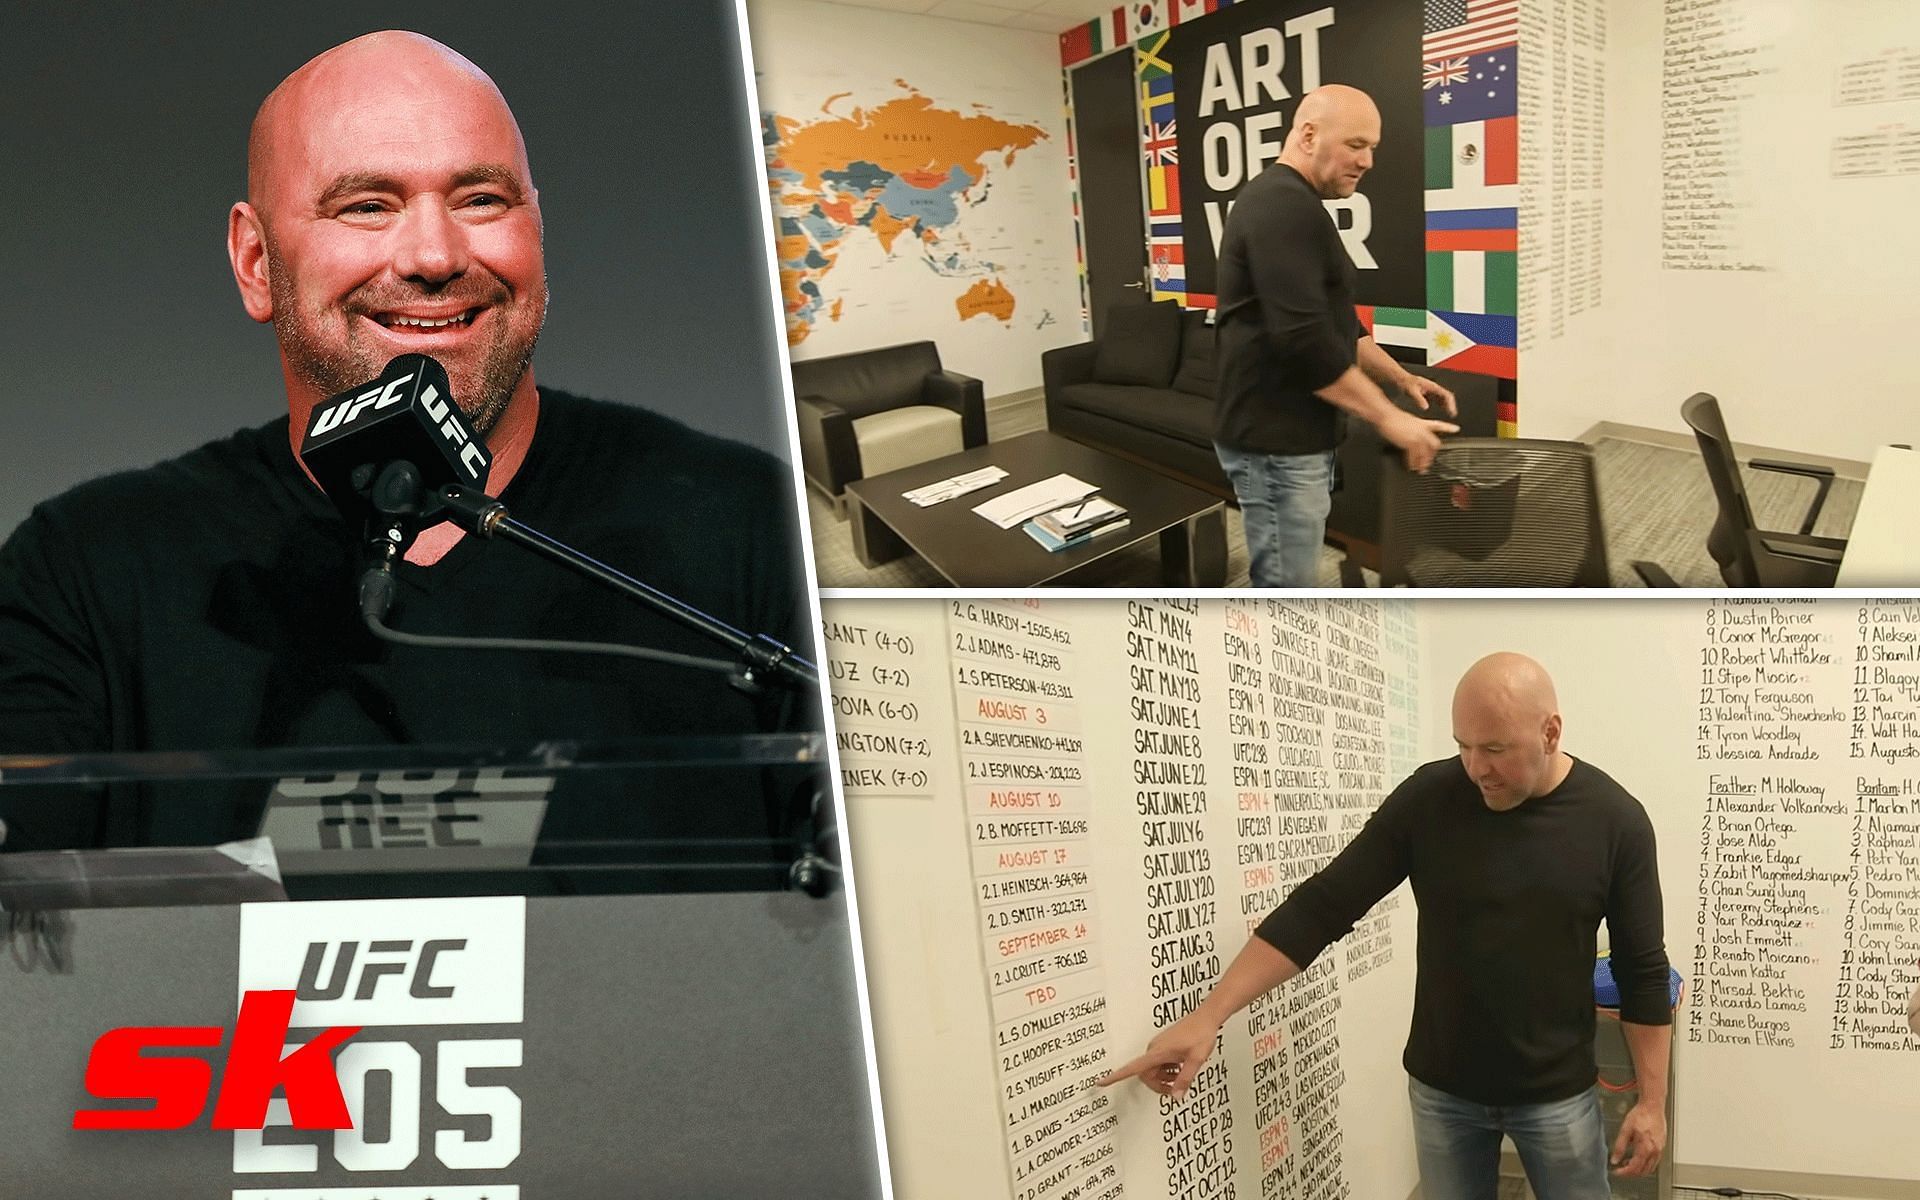 Dana White (left) and UFC War Room (right) [Image credits: Getty Images and @BarstoolSports on Youtube] 